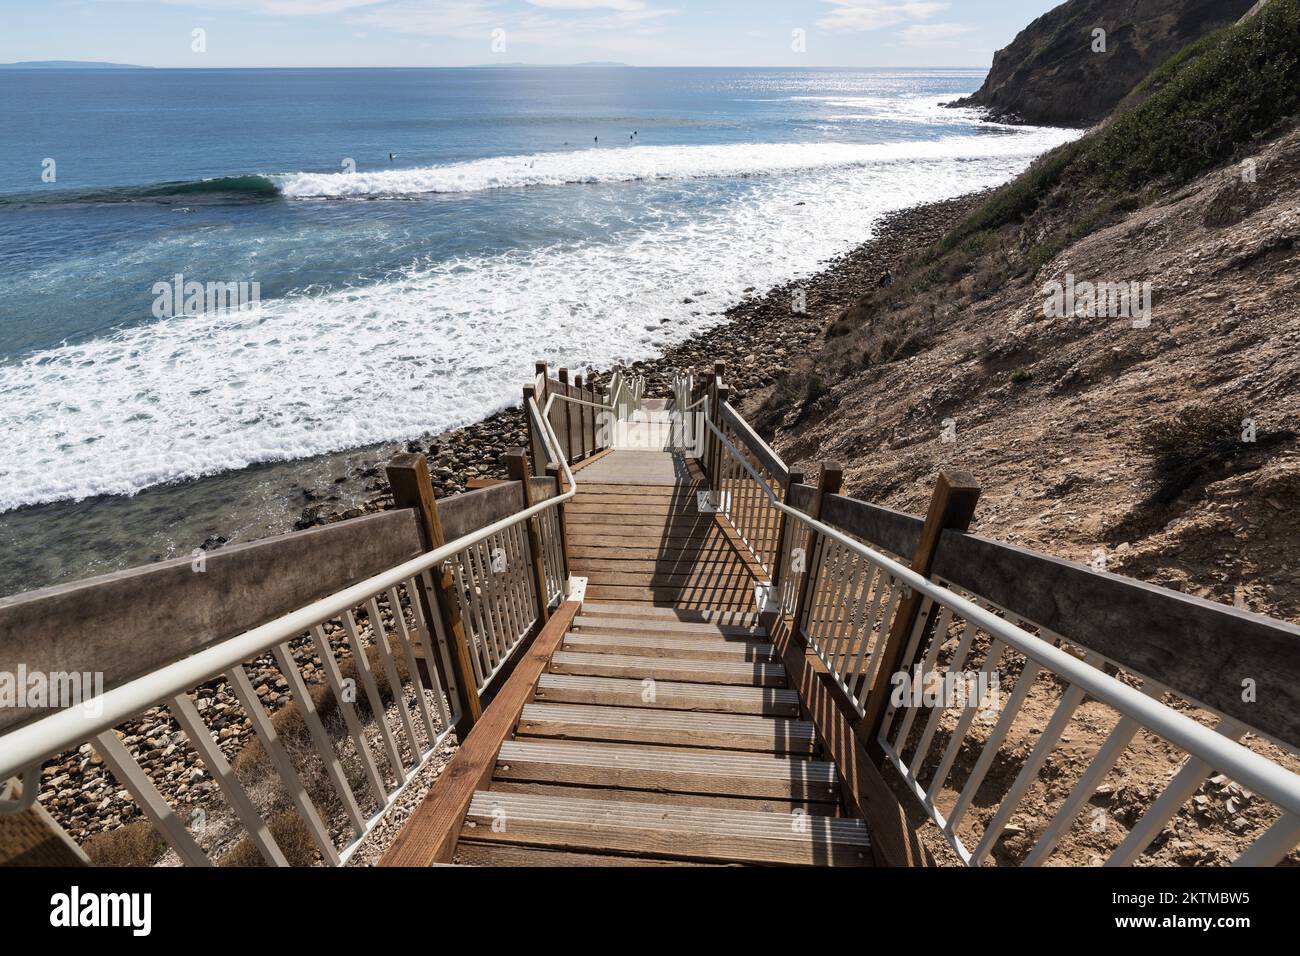 Newly improved staircase leading down to remote Dume Cove beach surf area in Malibu, California. Stock Photo